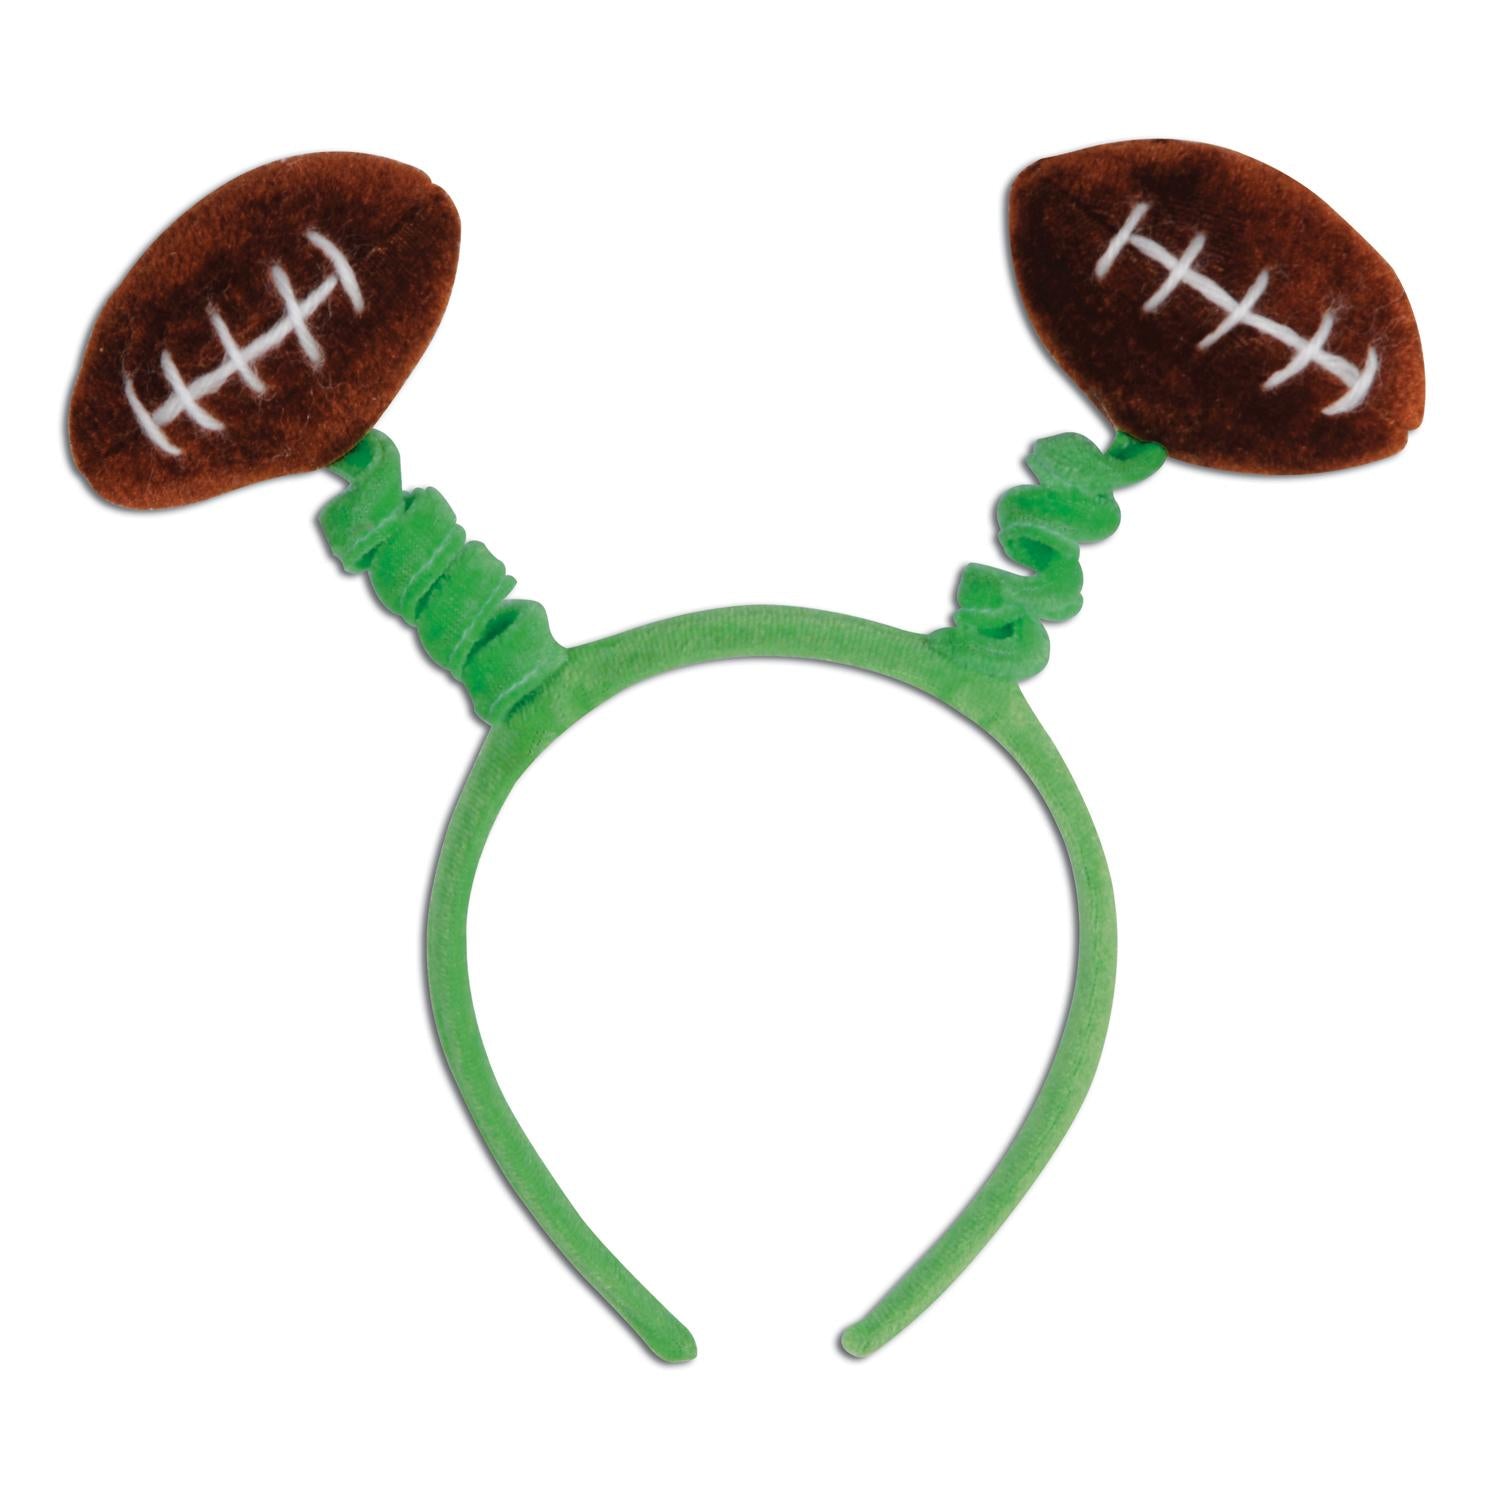 Beistle Football Party Boppers